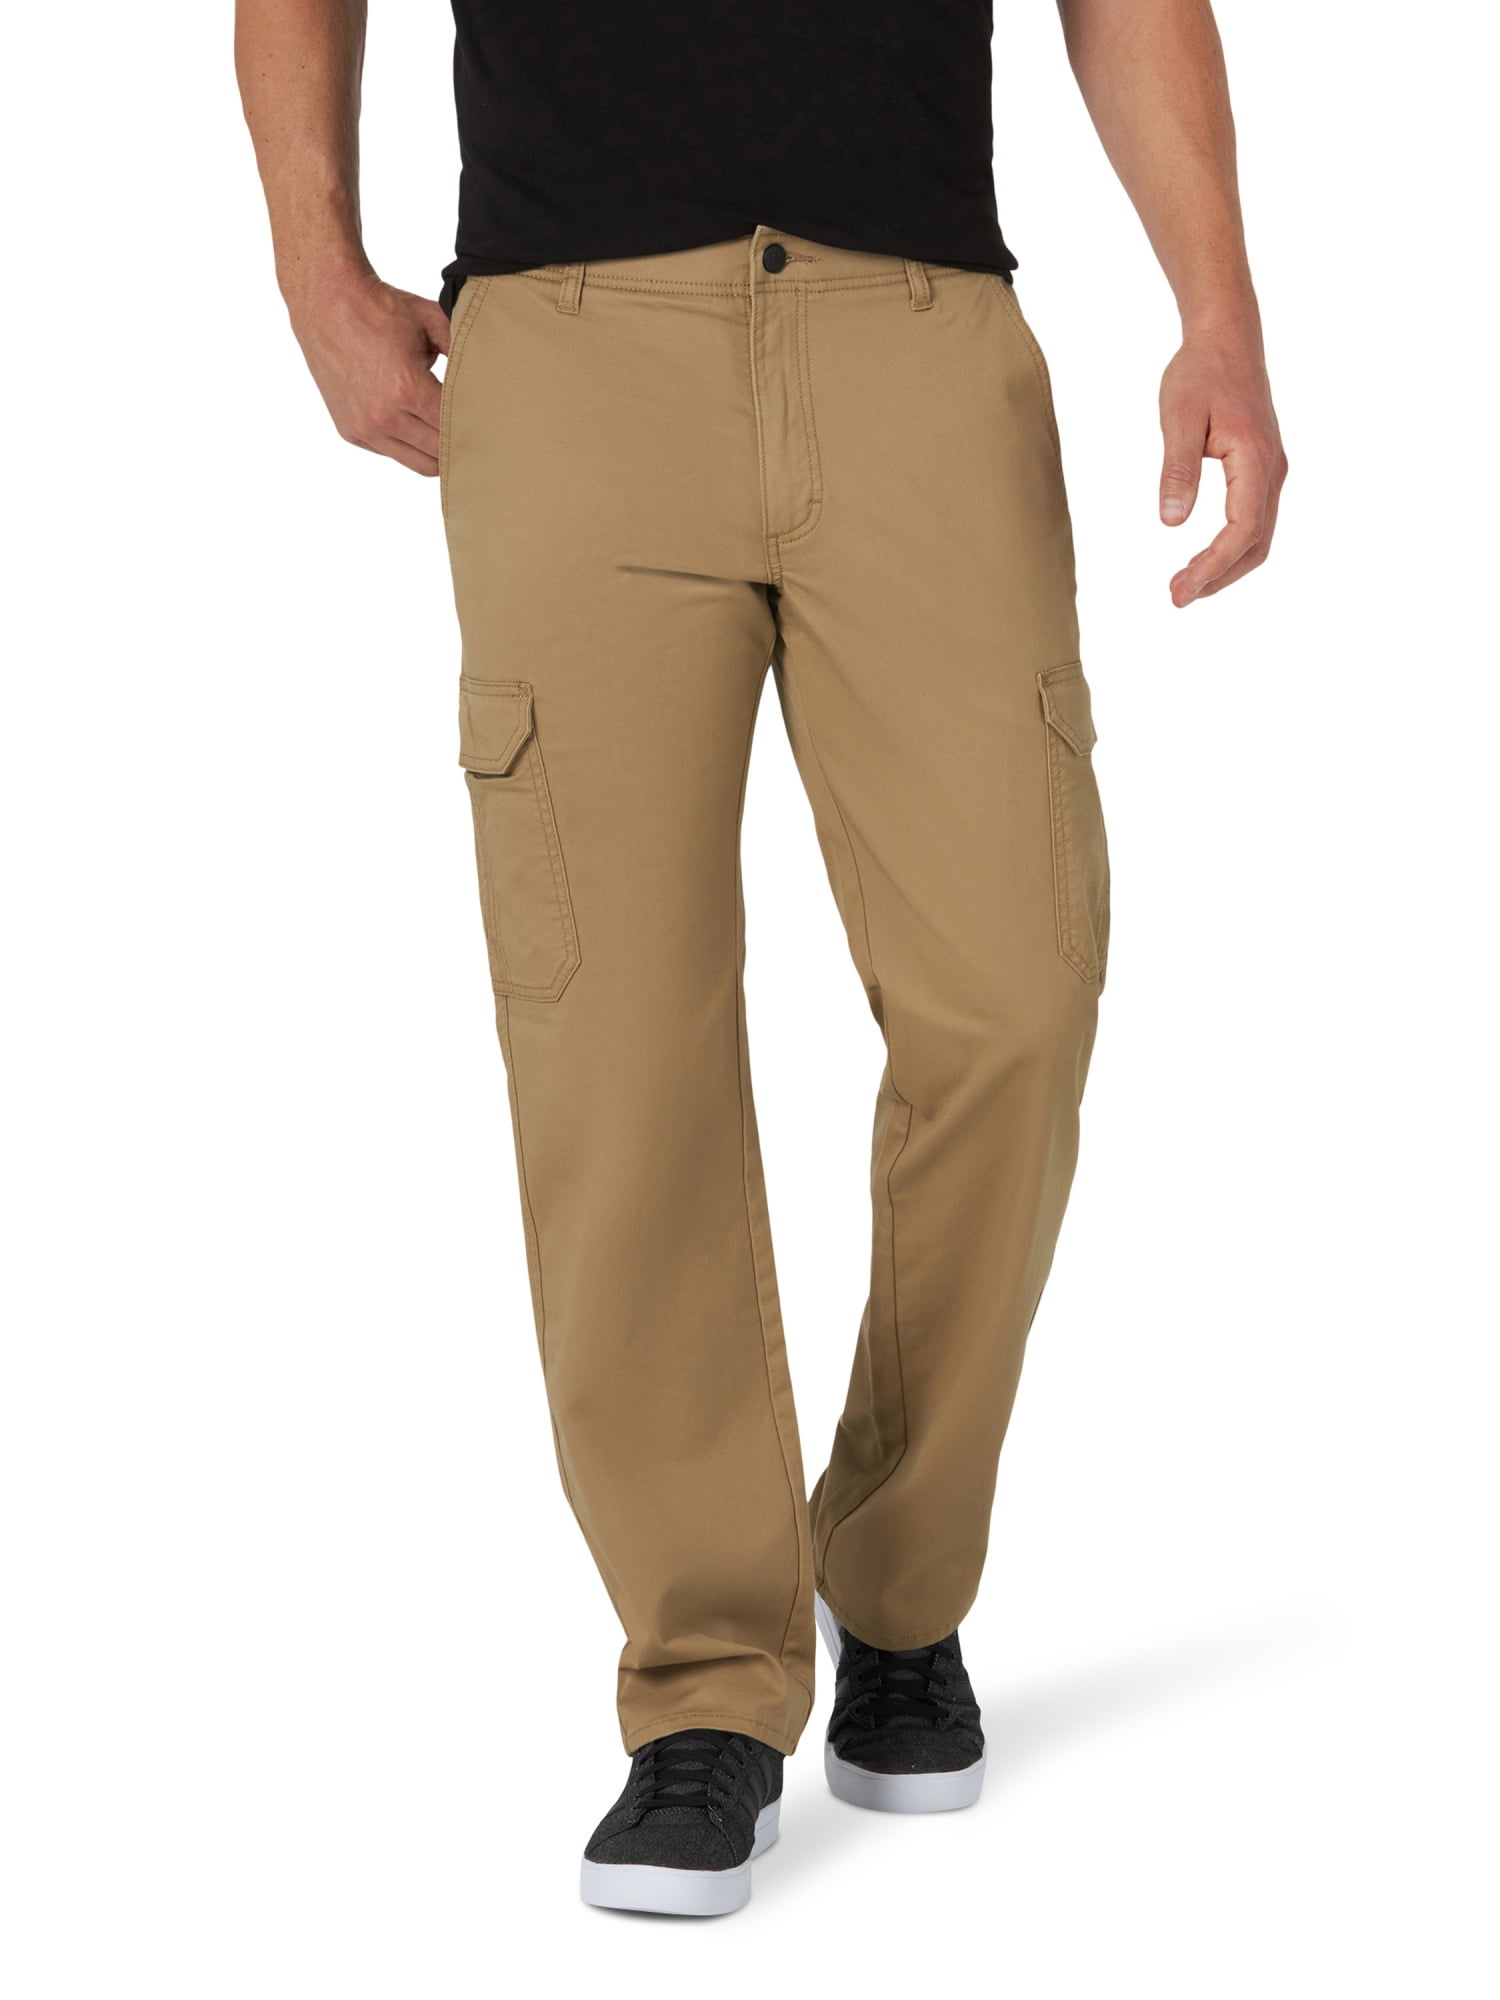 Lee Mens Performance Series Extreme Comfort Cargo Pant Casual Pants